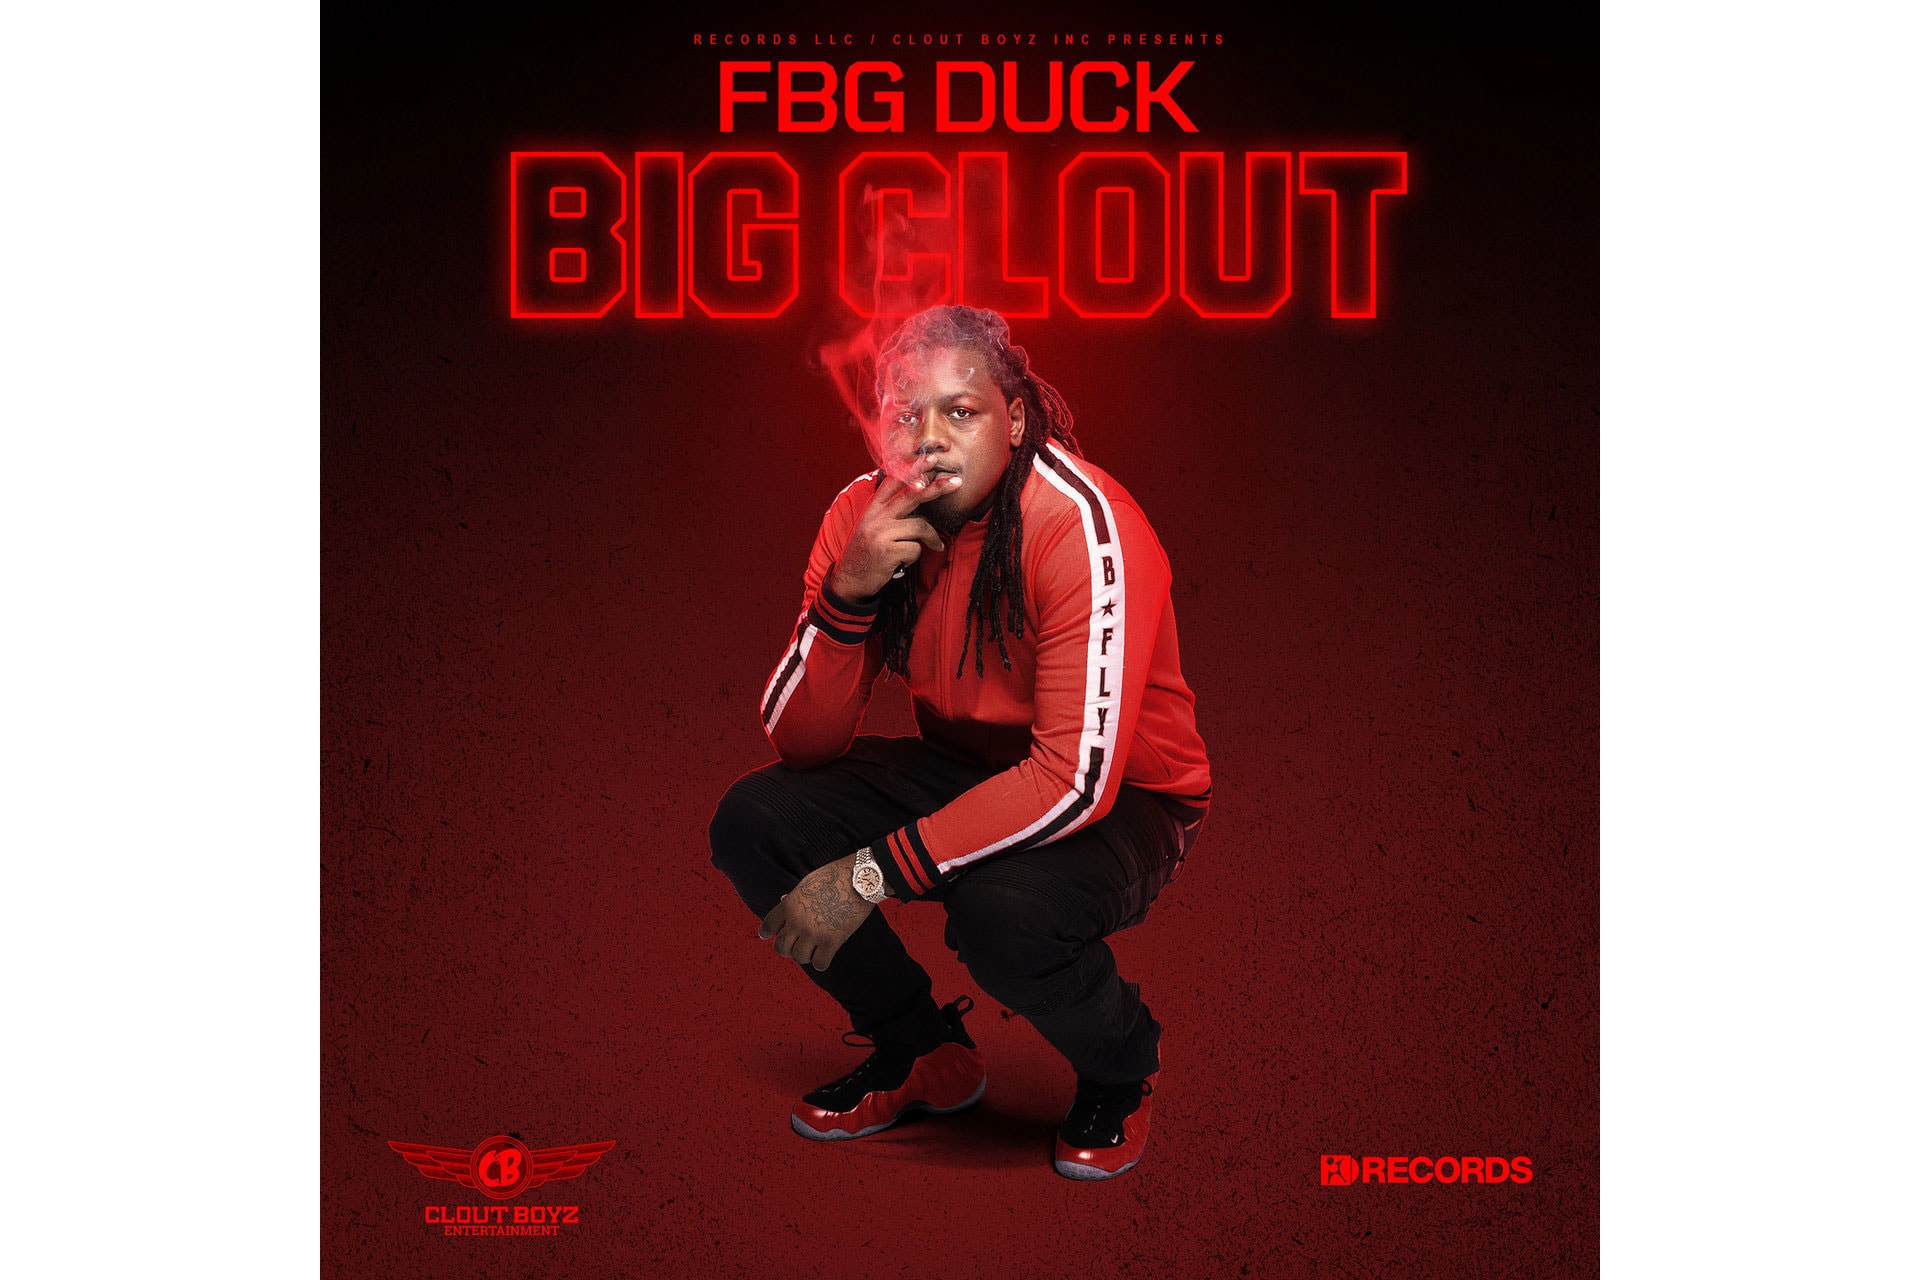 FBG Duck Big Clout Album Stream Listen New Music Track Song mamas house or not young dutchie cali using me play them games mention